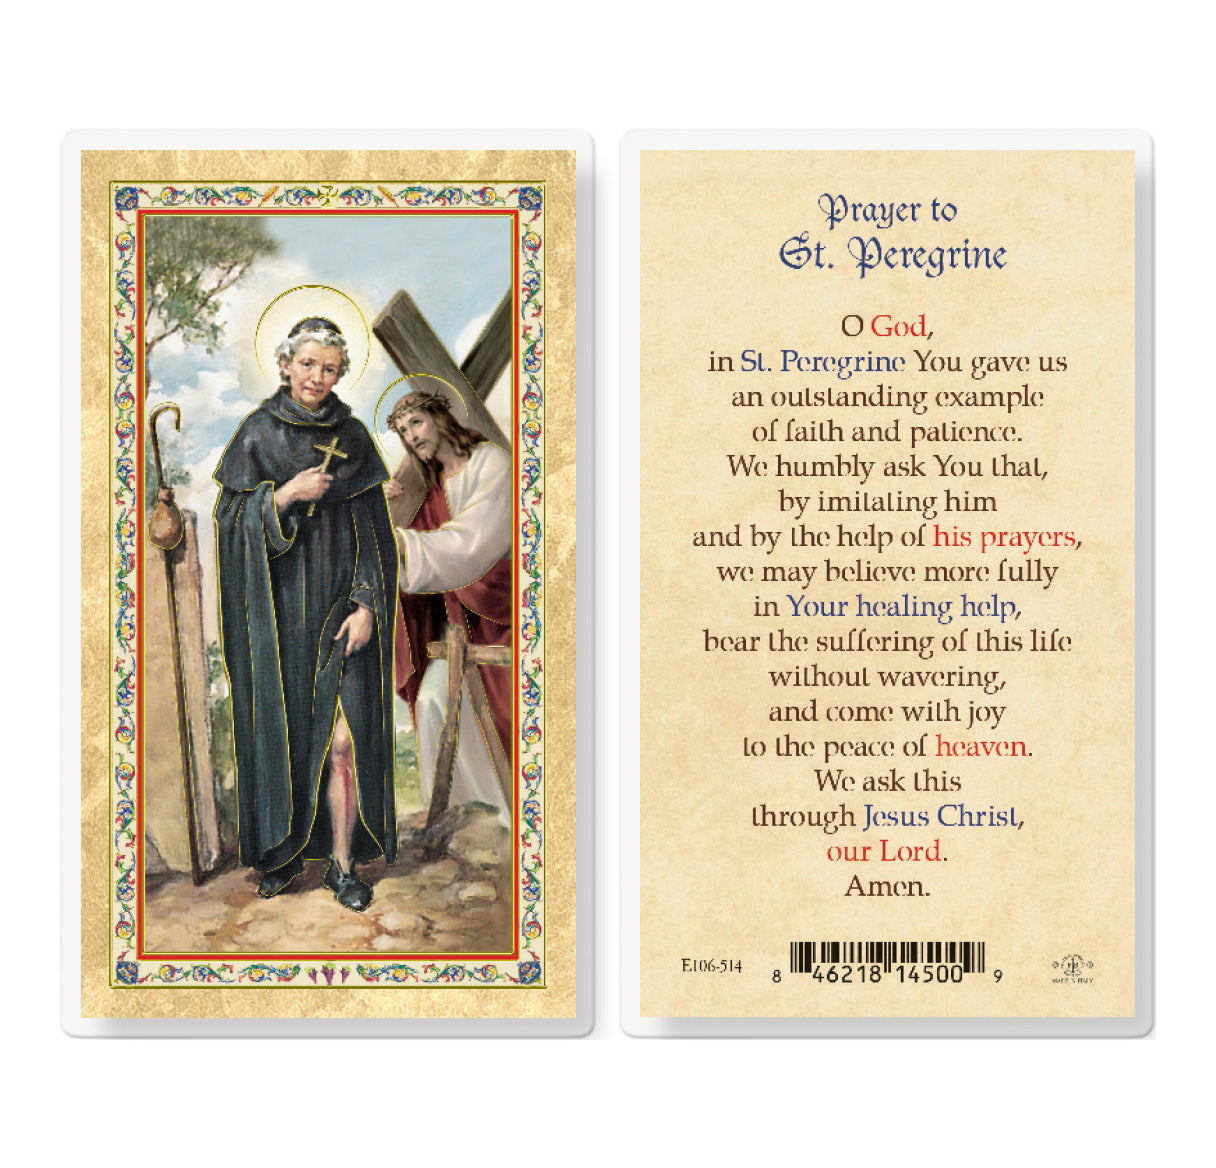 Prayer to St. Peregrine Gold-Stamped Laminated Catholic Prayer Holy Card with Prayer on Back, Pack of 25